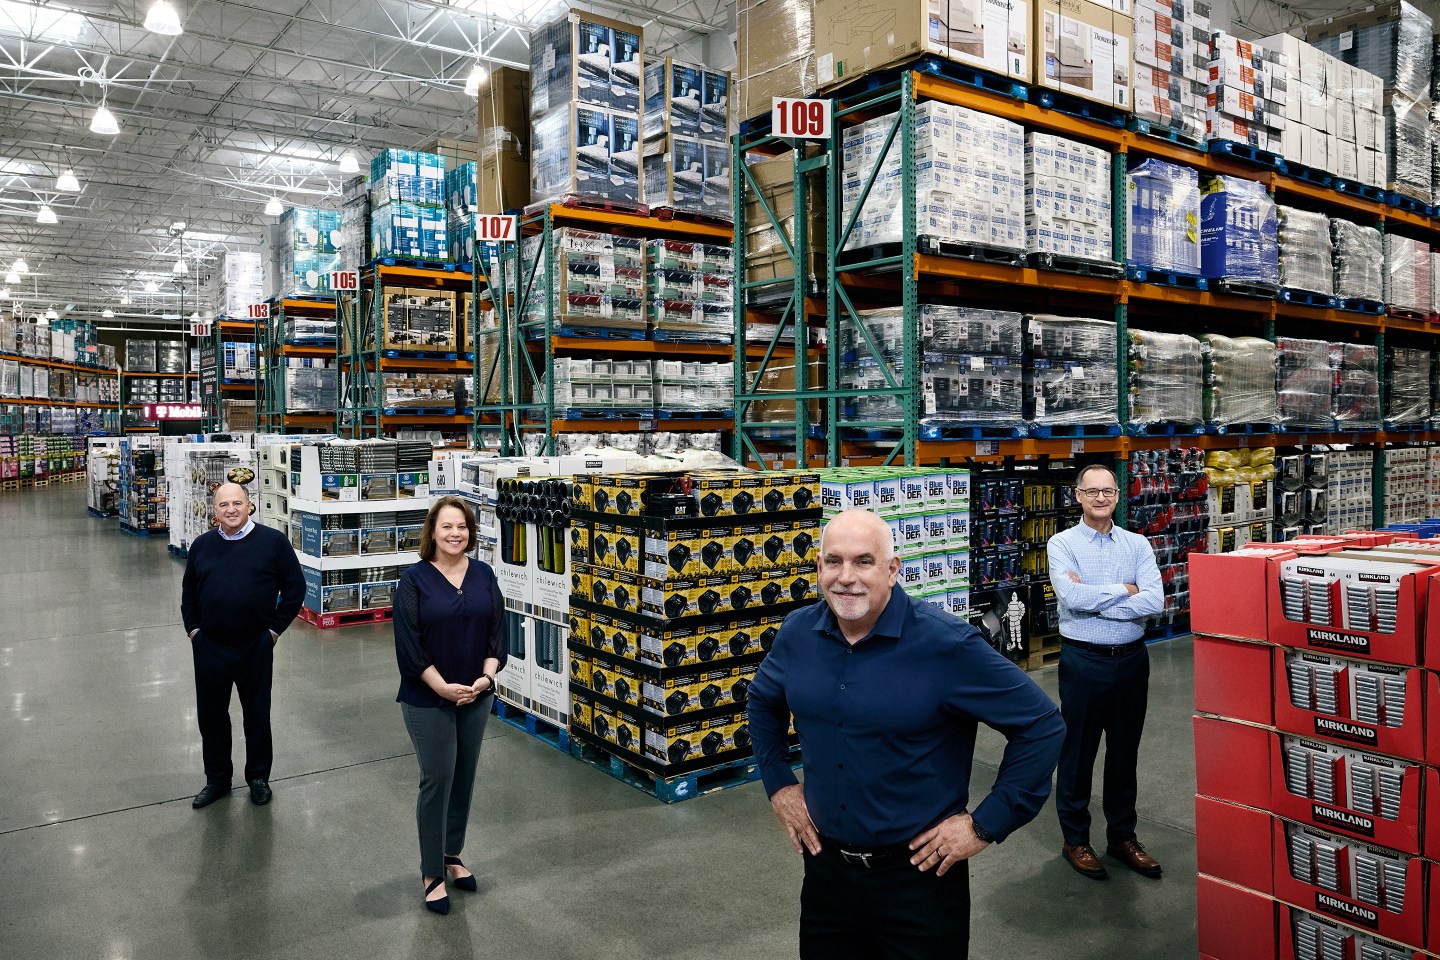 MAD SCIENTIST C-SUITE From left: Advisor and former CFO Richard Galanti, merchandising chief Claudine Adamo, CEO Ron Vachris, and CFO Gary Millerchip at a Costco in Issaquah, Wash.

Costco C-Suite photographed in Issaquah, Washington May 7th, 2024. Art Streiber for Fortune